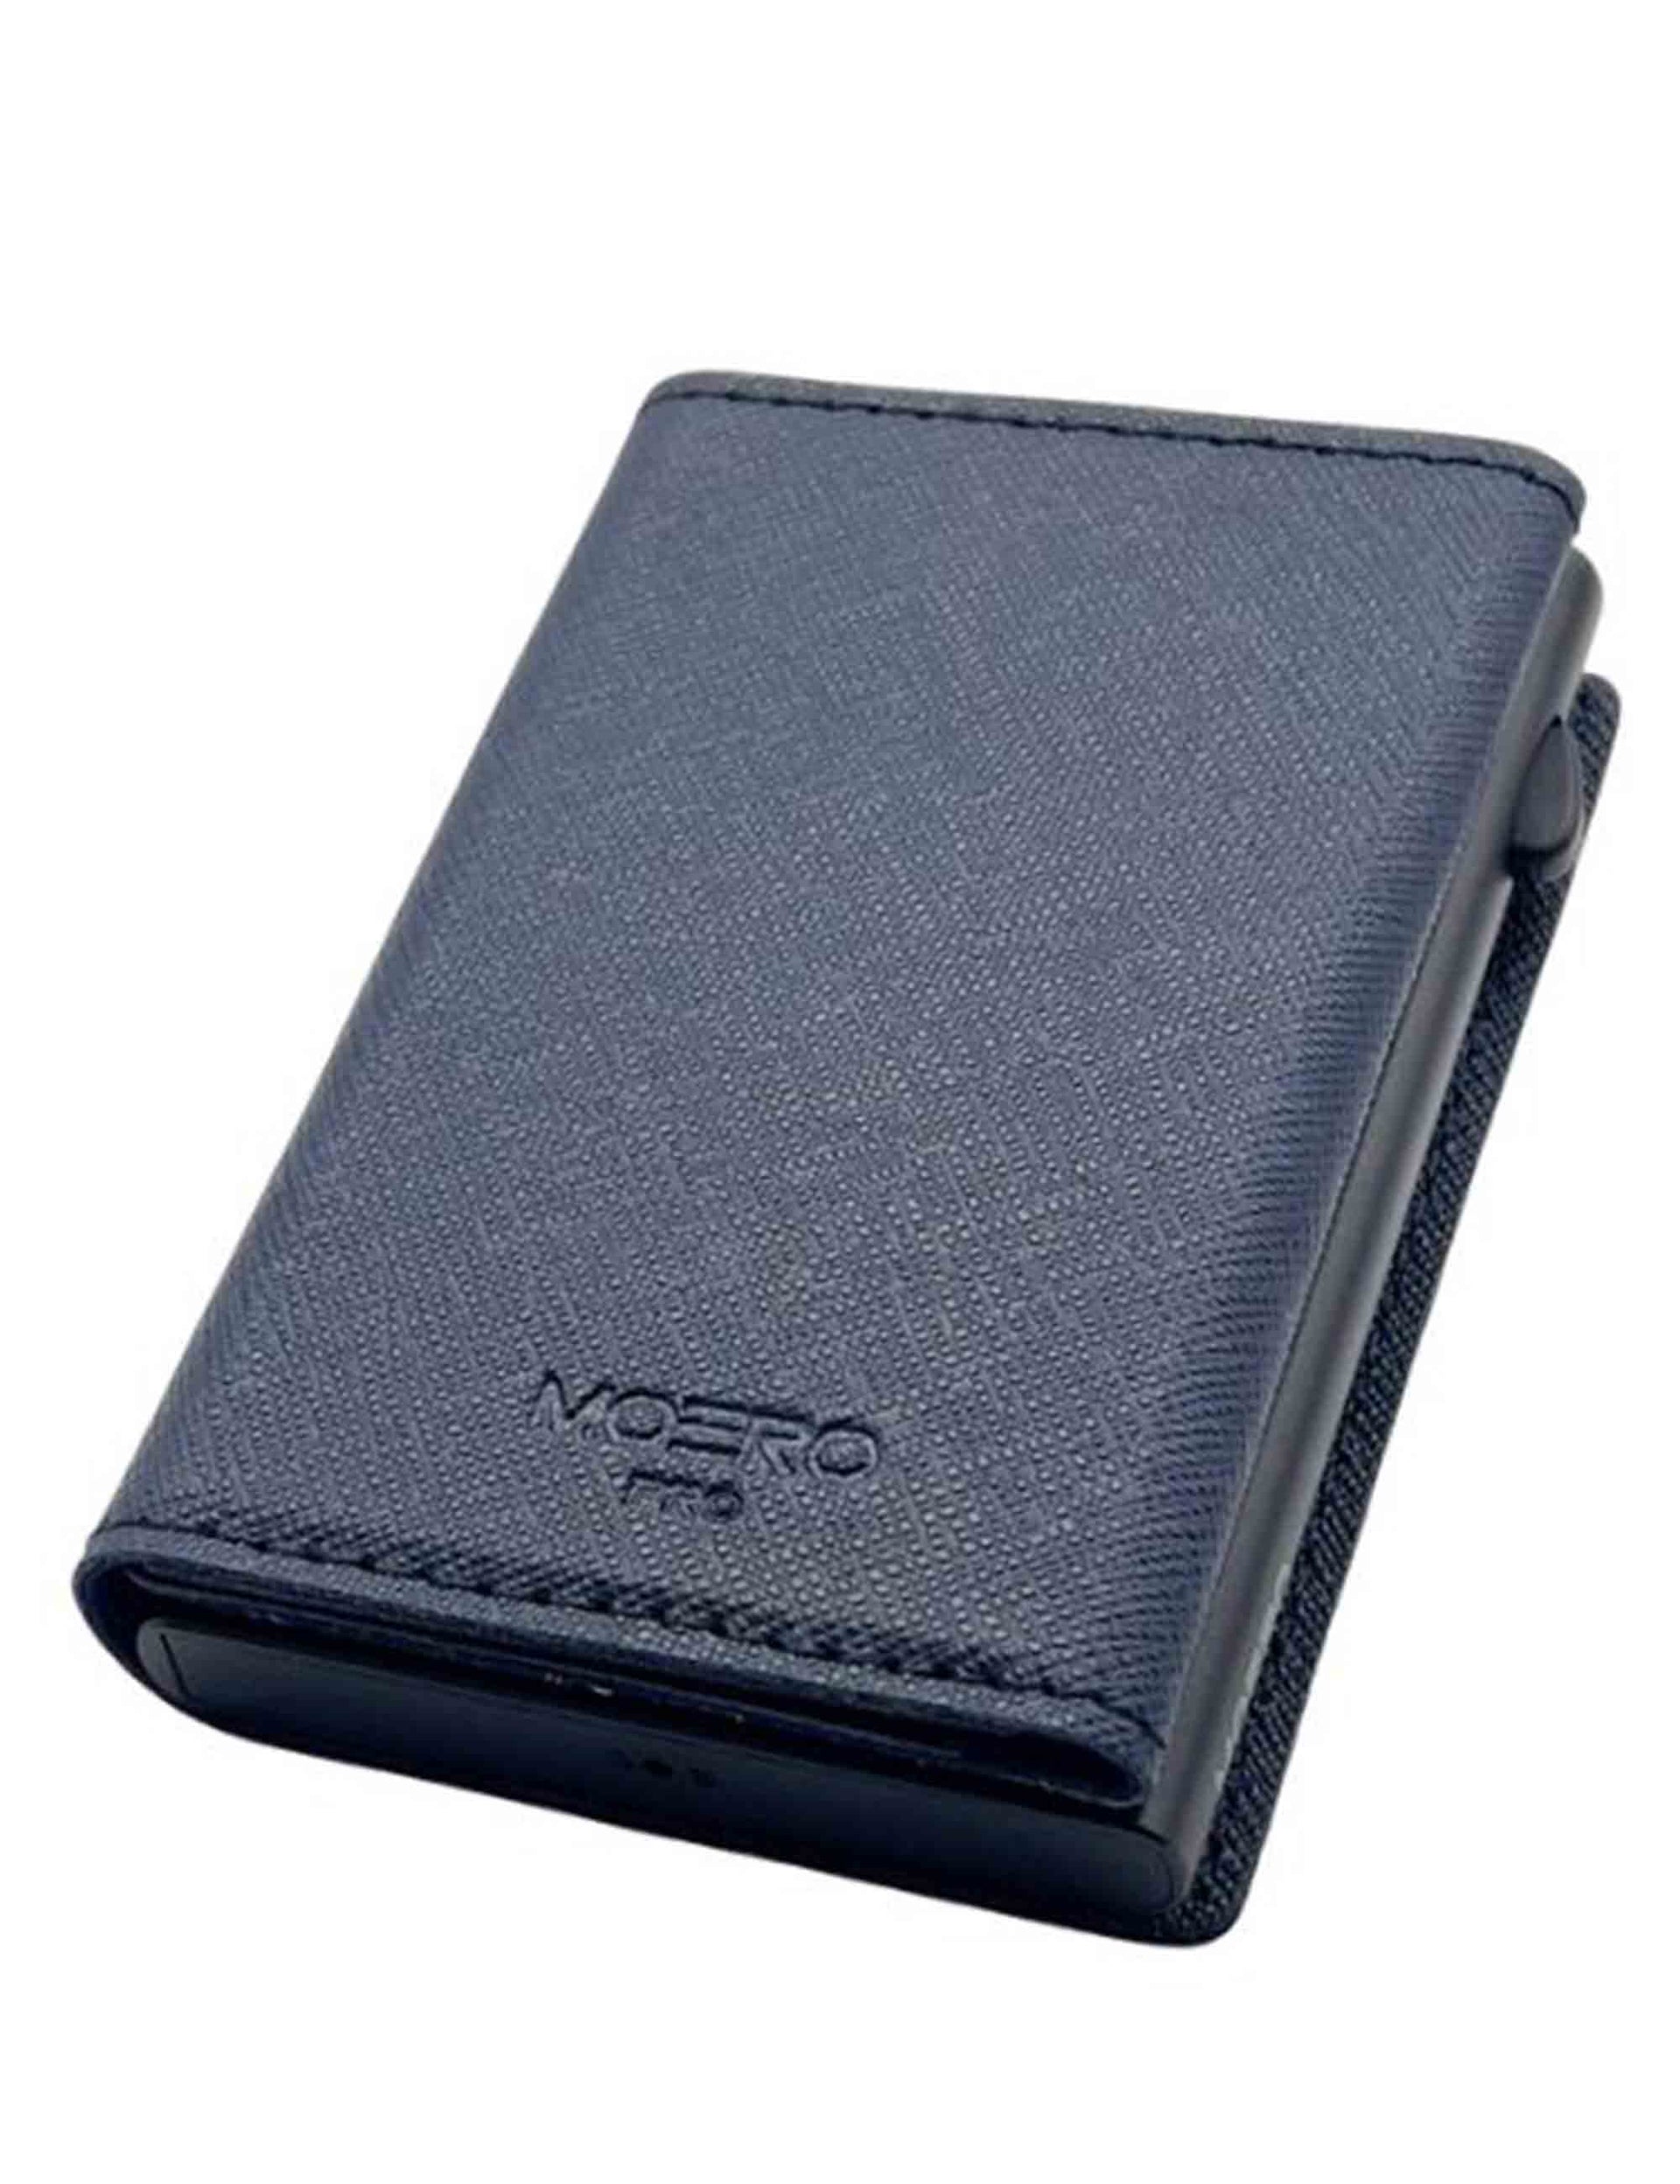 Pro card holder in scratch-resistant blue saffiano leather with coin pocket